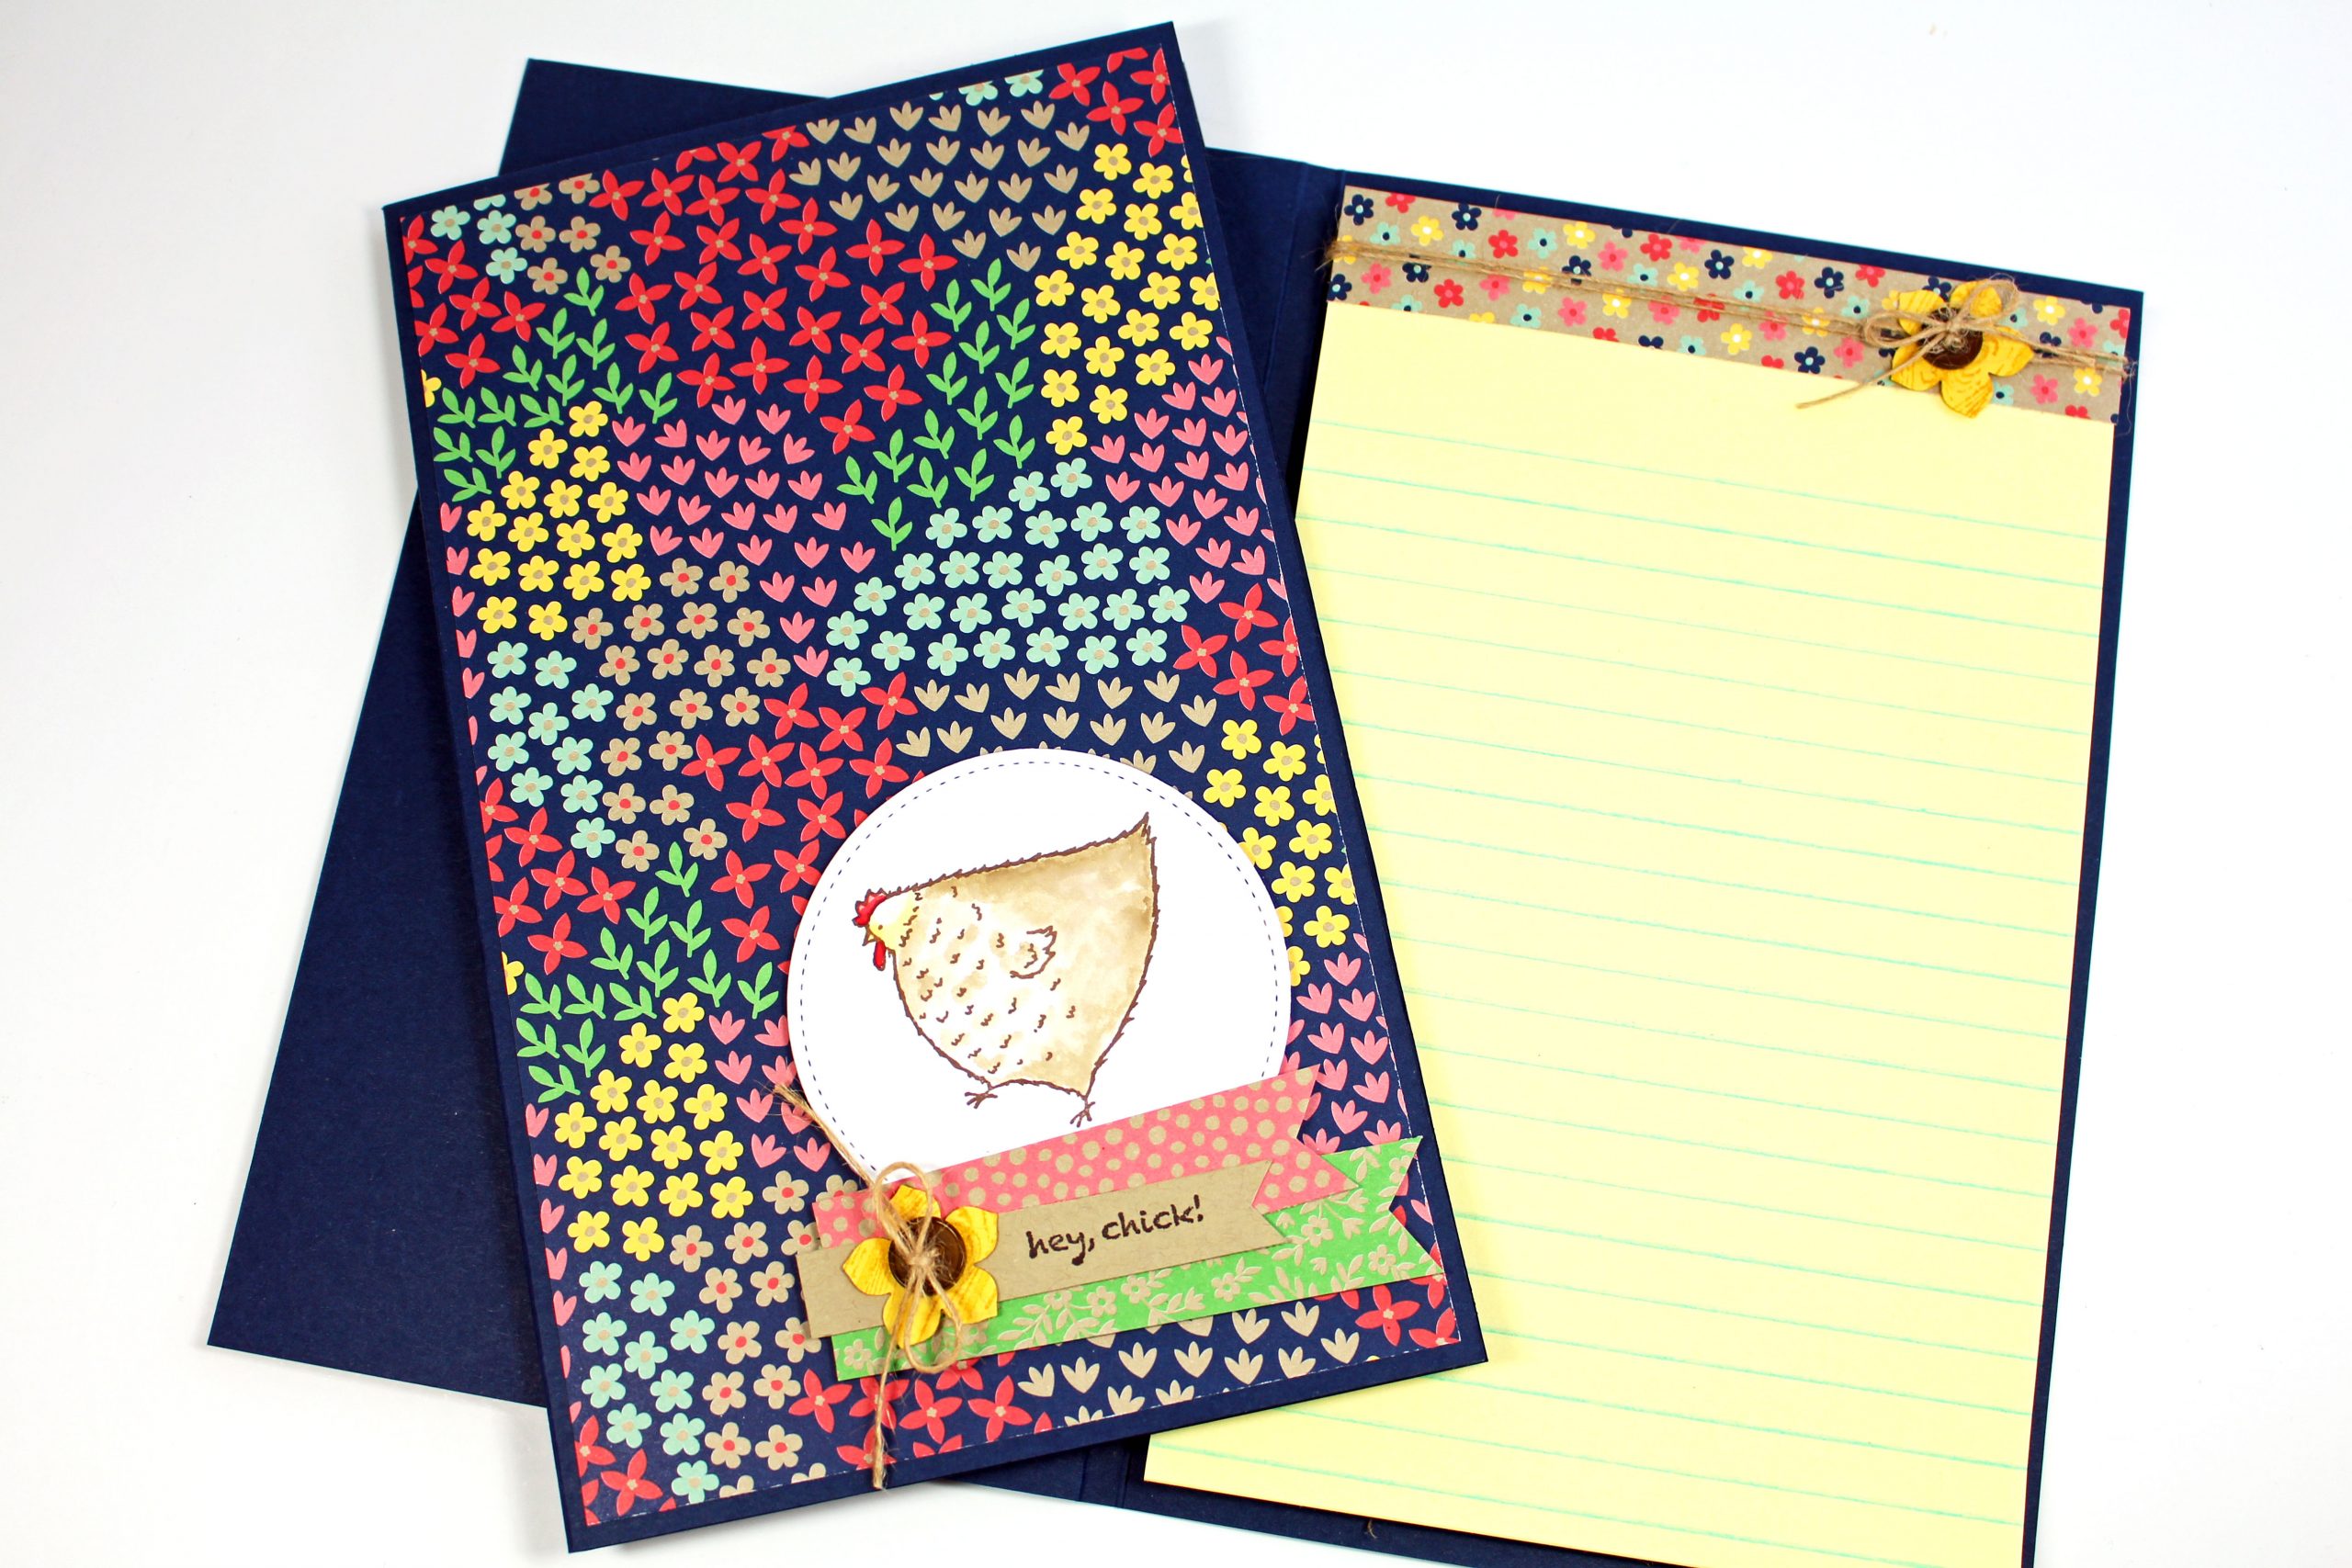 Hey Chick Covered Notepad Gift – Join Stampin’ Up! during Sale-a-bration, get free stamp sets!